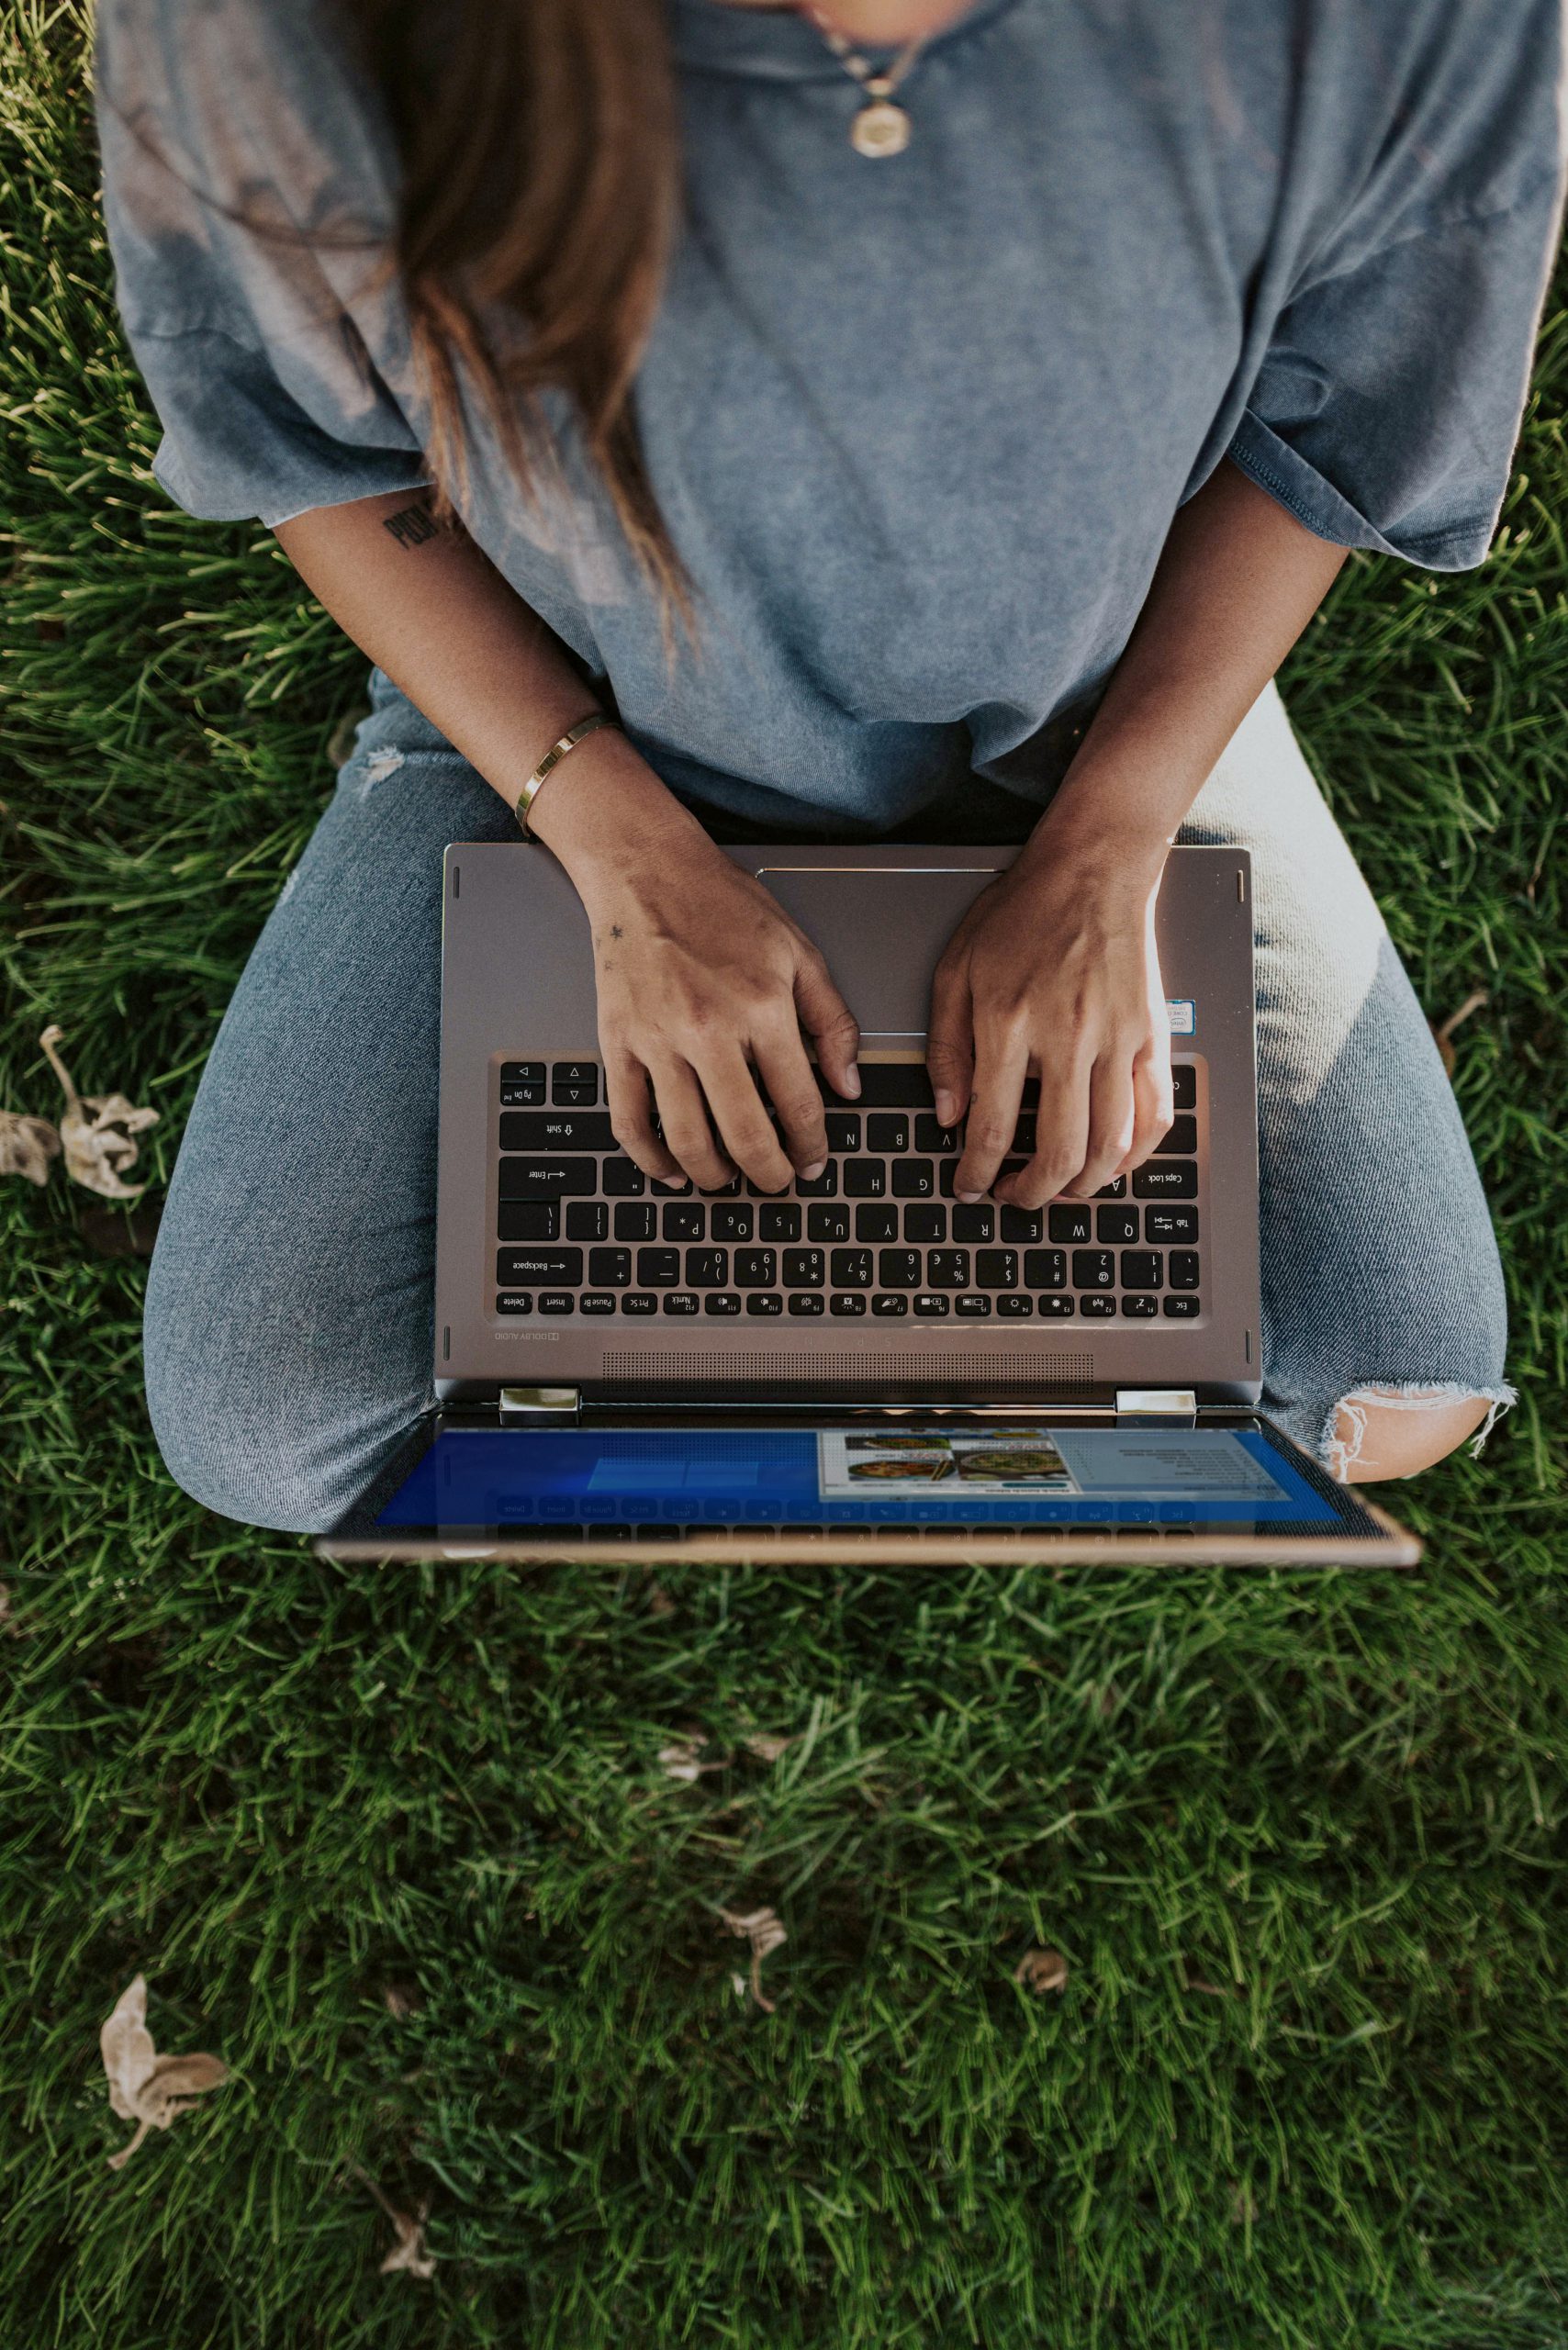 person in blue shirt and blue denim jeans sitting on green grass field using macbook pro